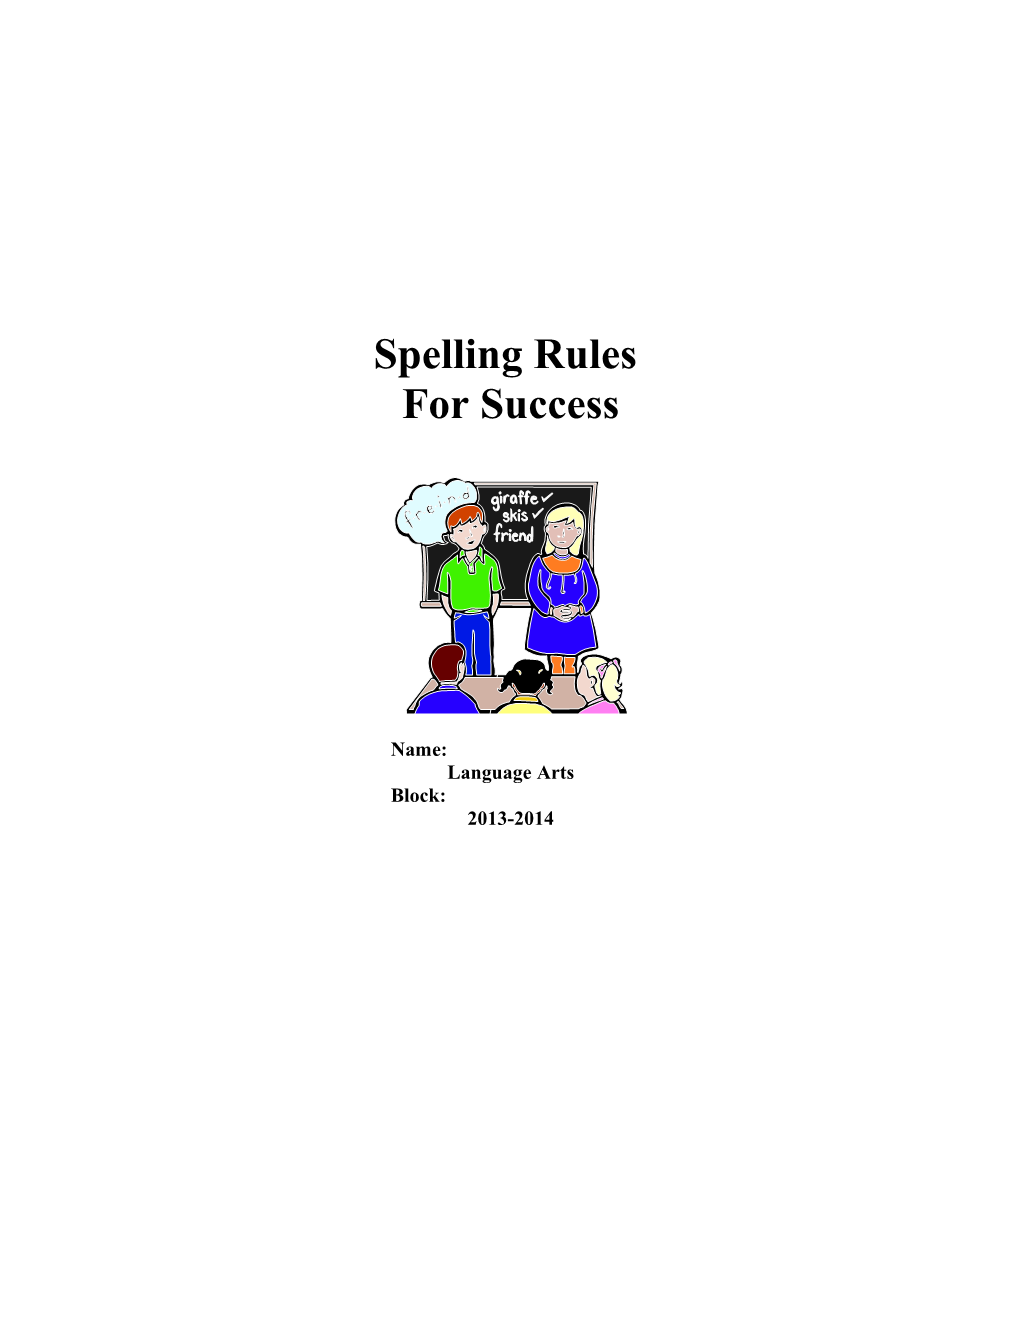 Spelling Rules for /K/ Sound